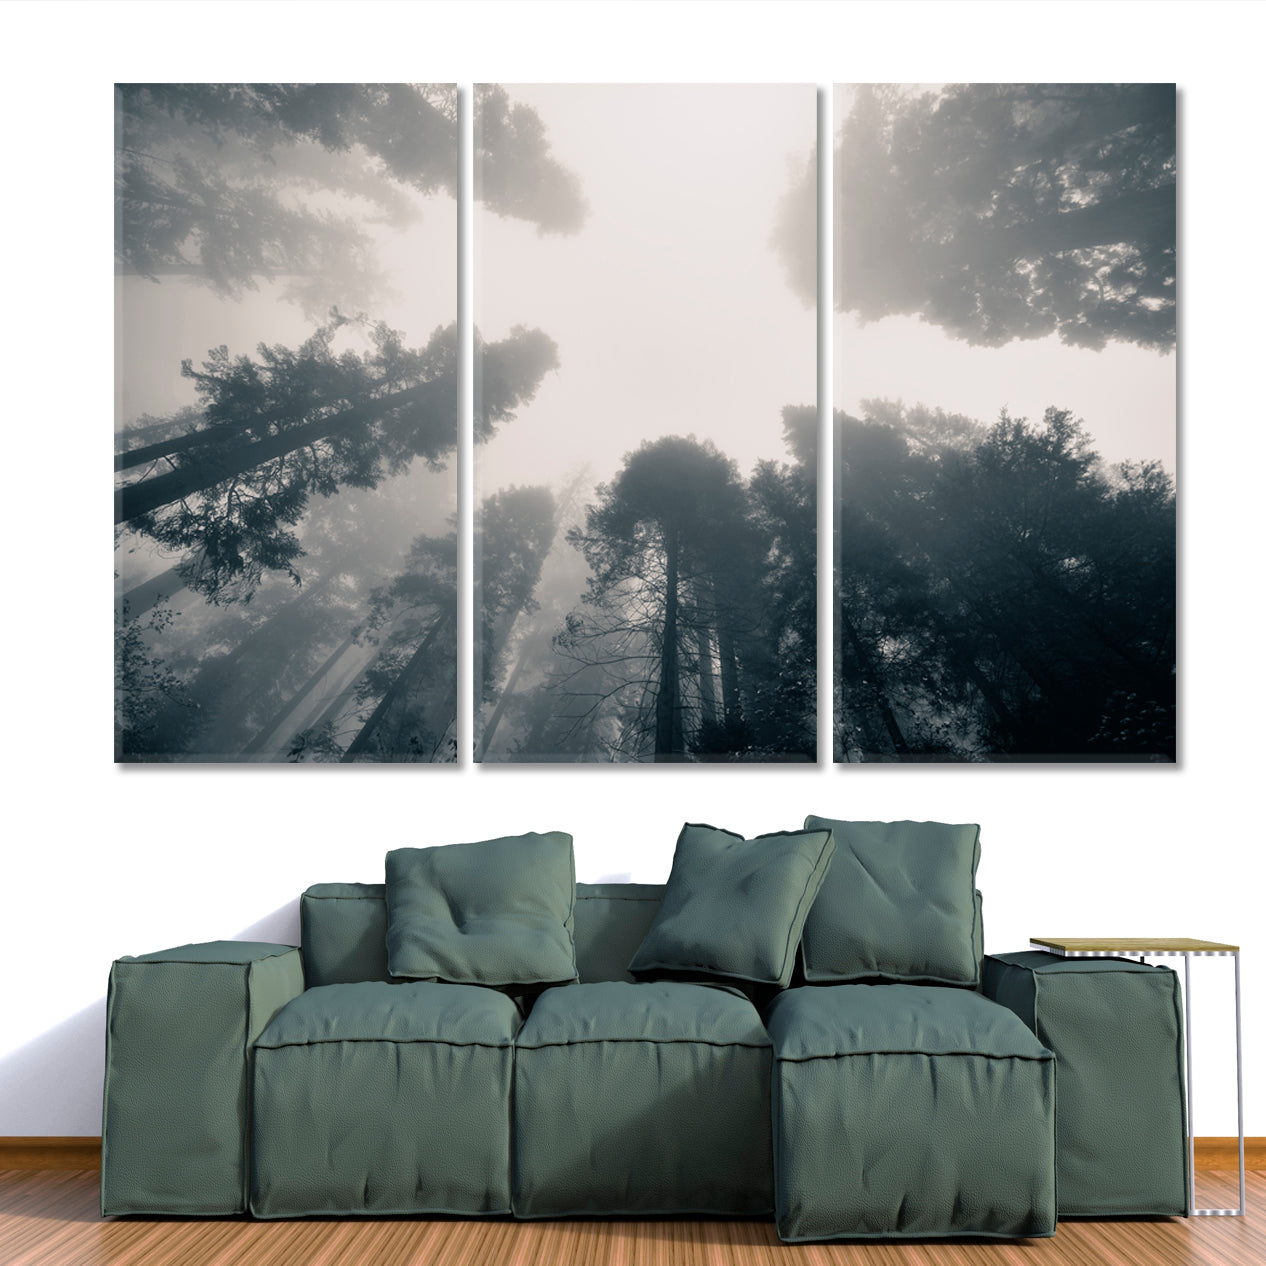 TREES Giant Tree Fog Sequoia National Park Misty Forest Nature Wall Canvas Print Artesty 3 panels 36" x 24" 